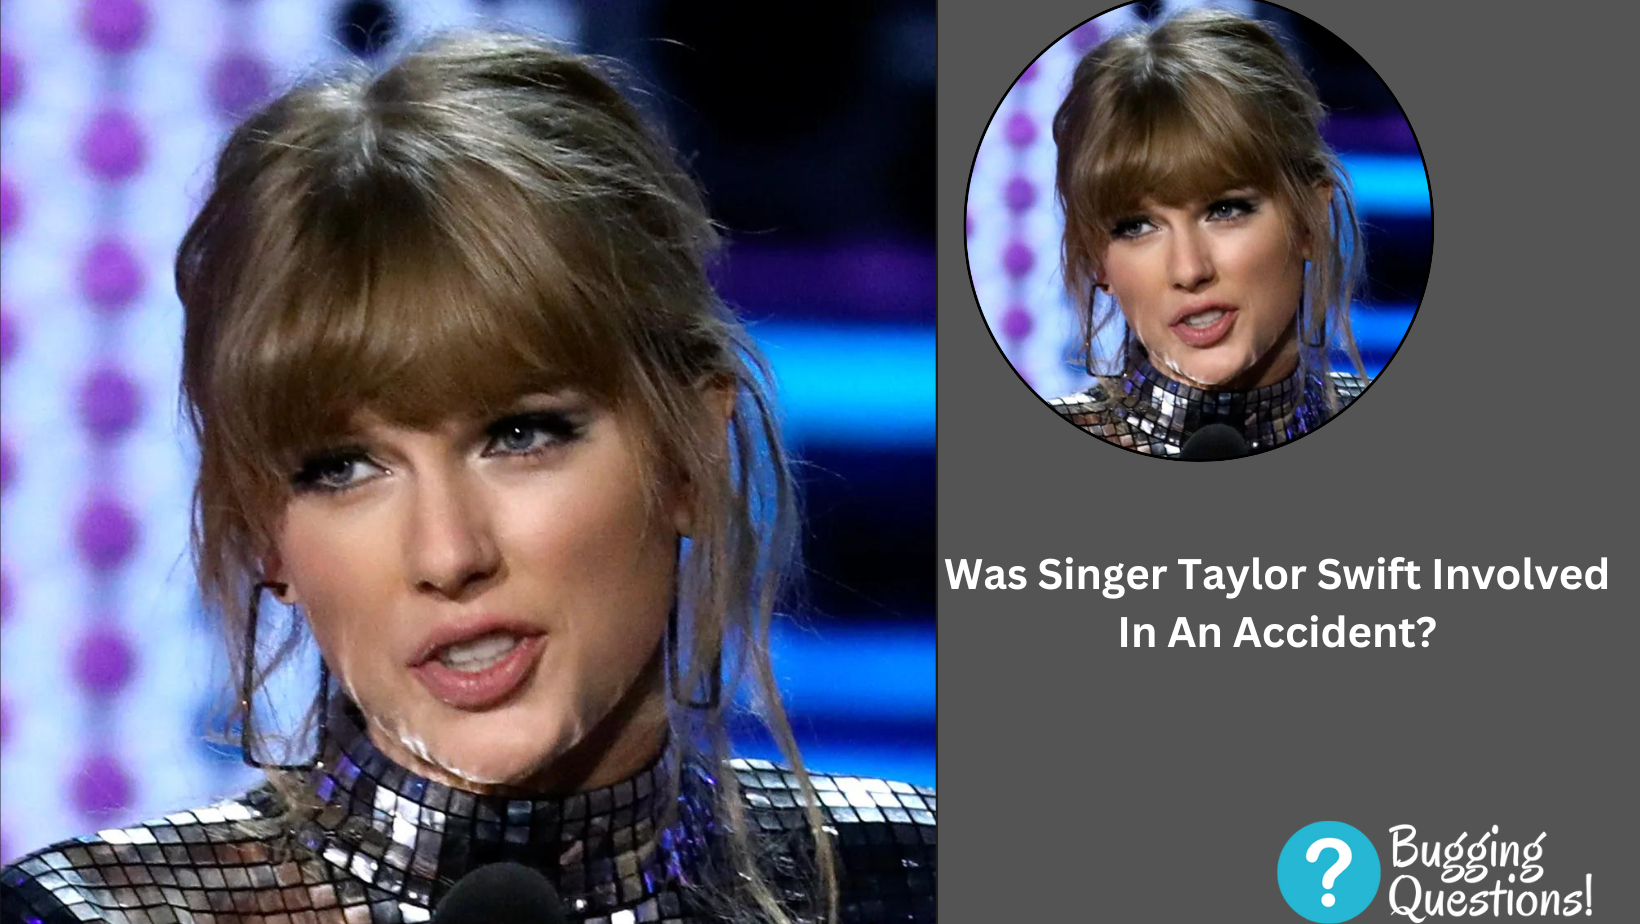 Was Singer Taylor Swift Involved In An Accident?